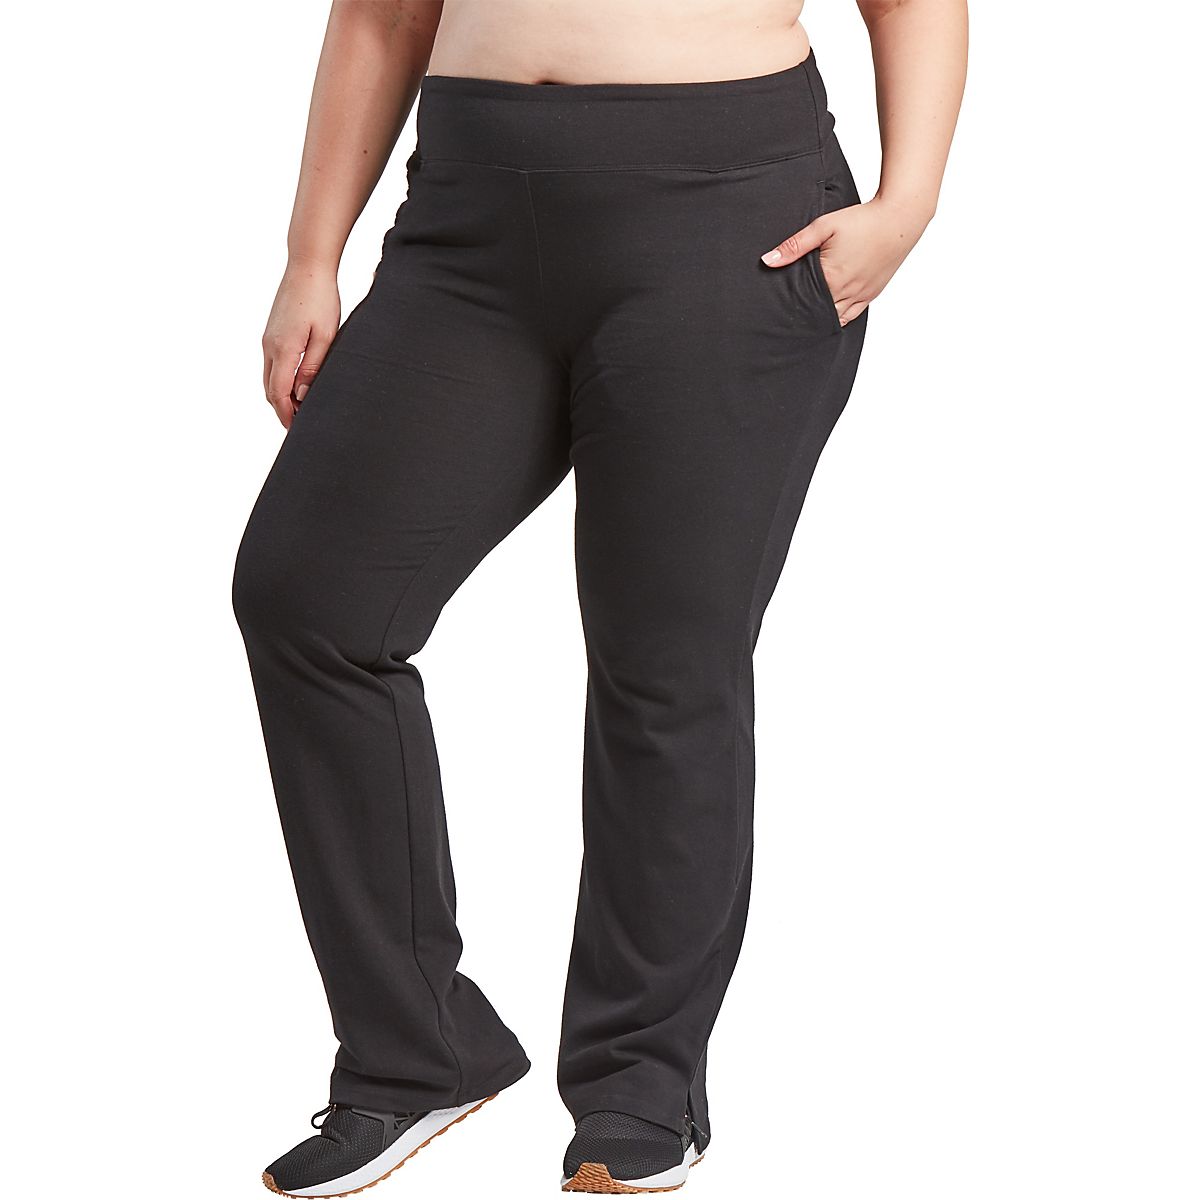 Danskin Now Semi Fitted Pants | lupon.gov.ph